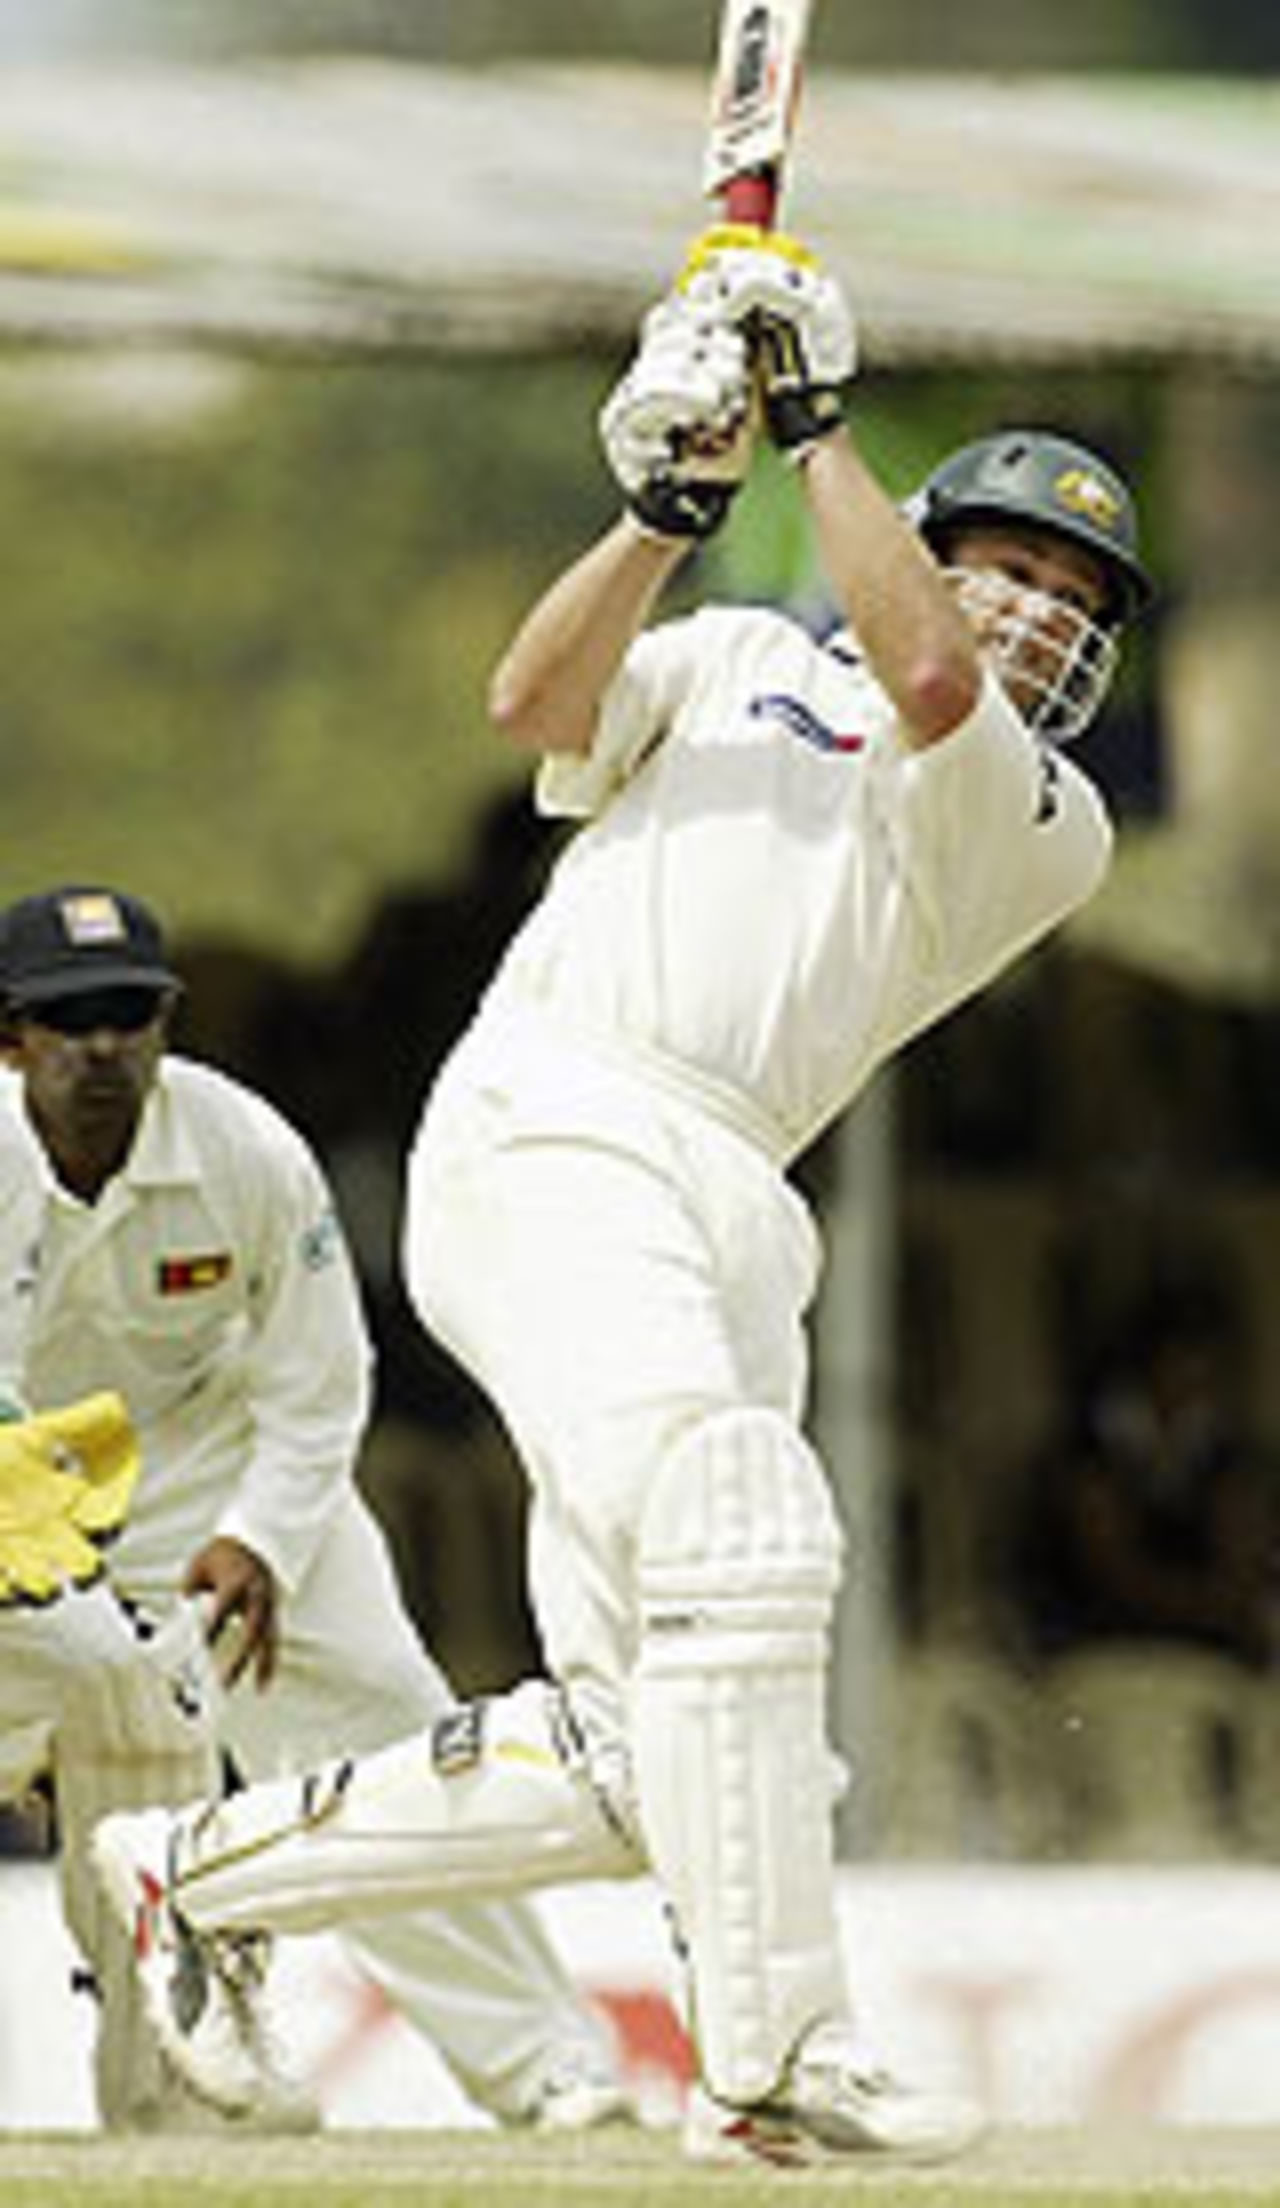 Adam Gilchrist strikes out during his century, Sri Lanka v Australia, 2nd Test, Kandy, 2nd day, March 17, 2004